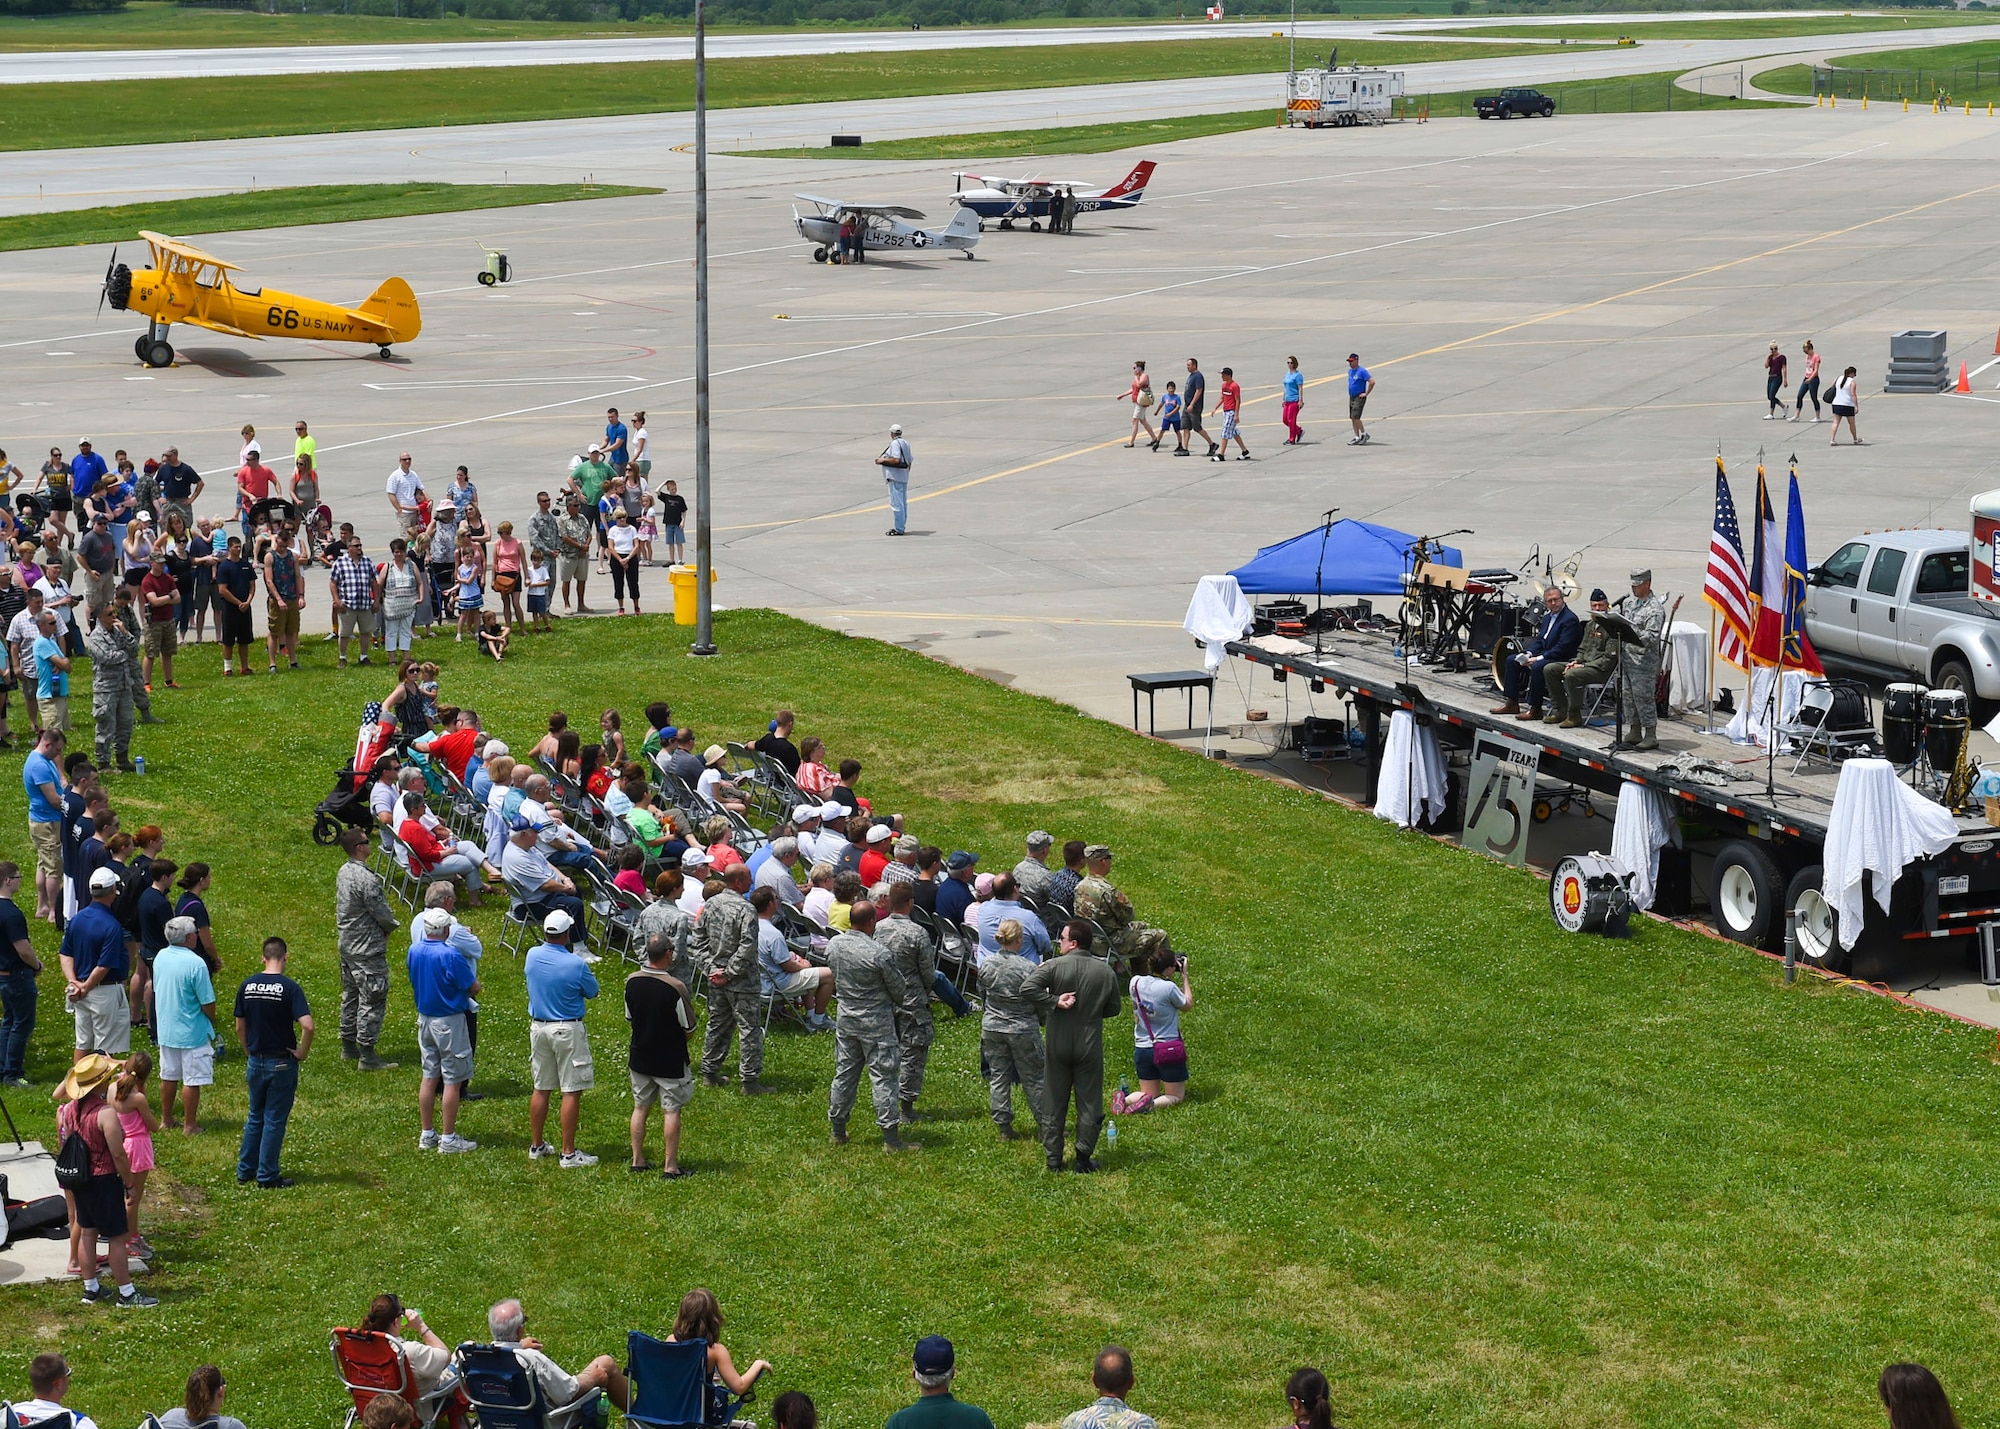 Current members and alumni of the 132d Wing participate in the wing's 75th Anniversary celebration June 11, 2016, at the 132d Wing in Des Moines, Iowa. The celebration featured aircraft displays, bouncey houses, the Army band Sidewinders and numerous vendors. (U.S. Air National Guard photo by Staff Sgt. Michael J. Kelly/Released)